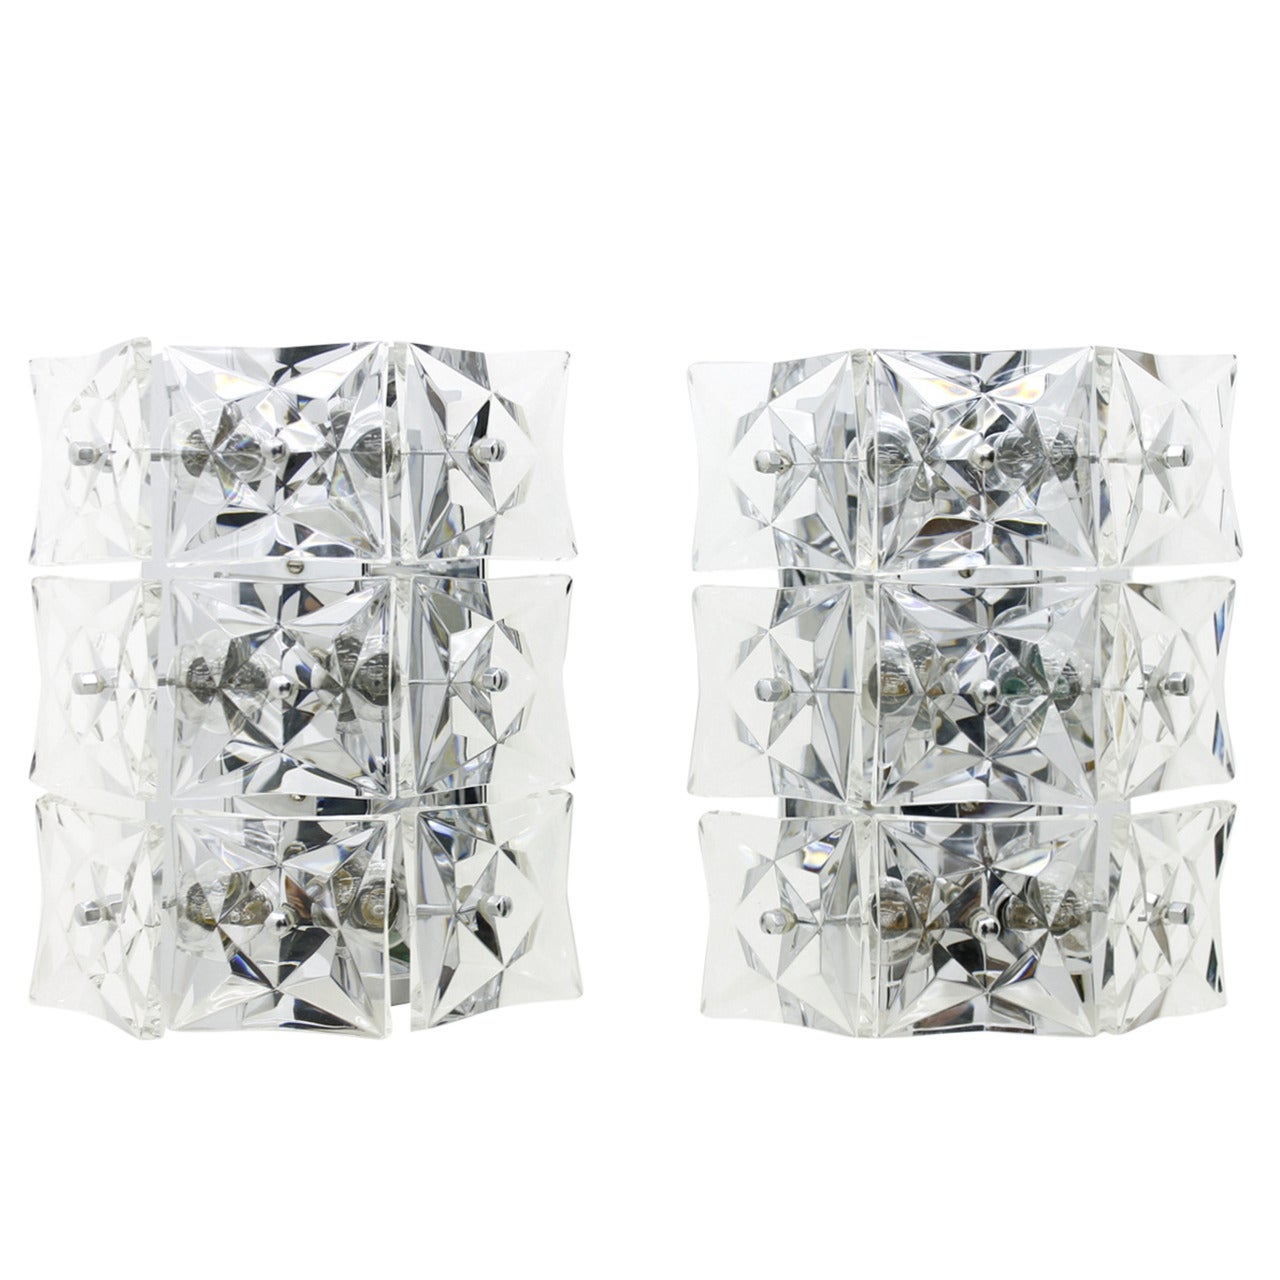 Pair of Large Crystal Glass Wall Sconces by Kinkeldey, circa 1960s